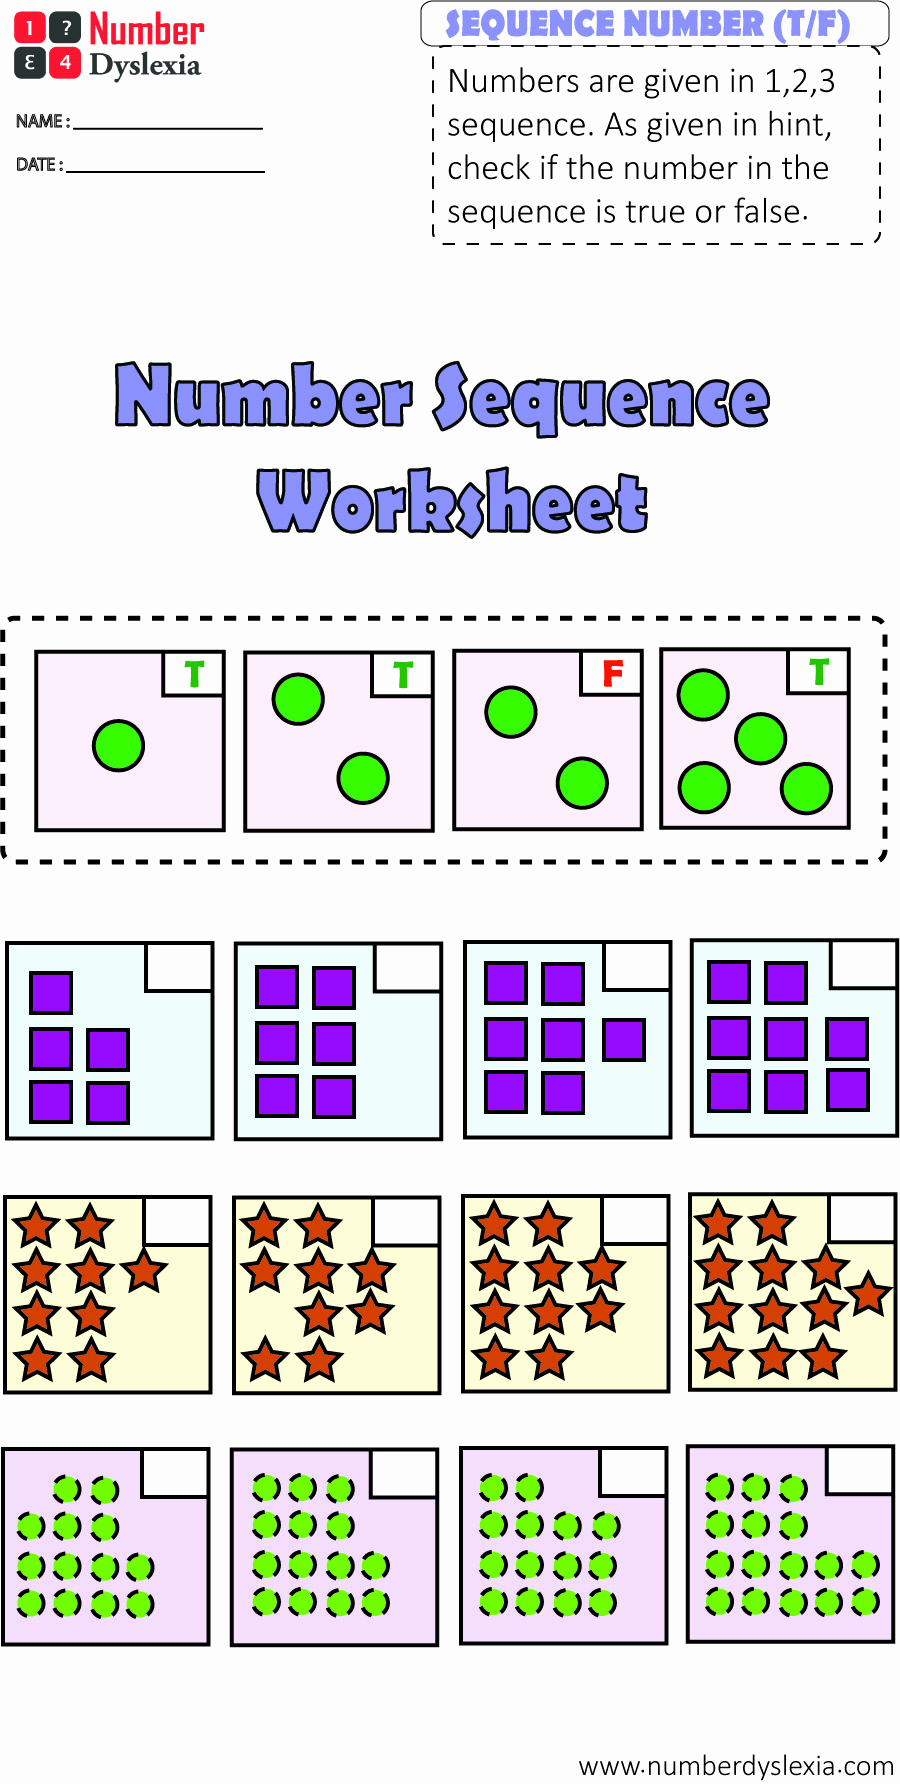 Sequencing Pictures Worksheets Elegant Free Printable Number Sequencing Worksheets [pdf] Number